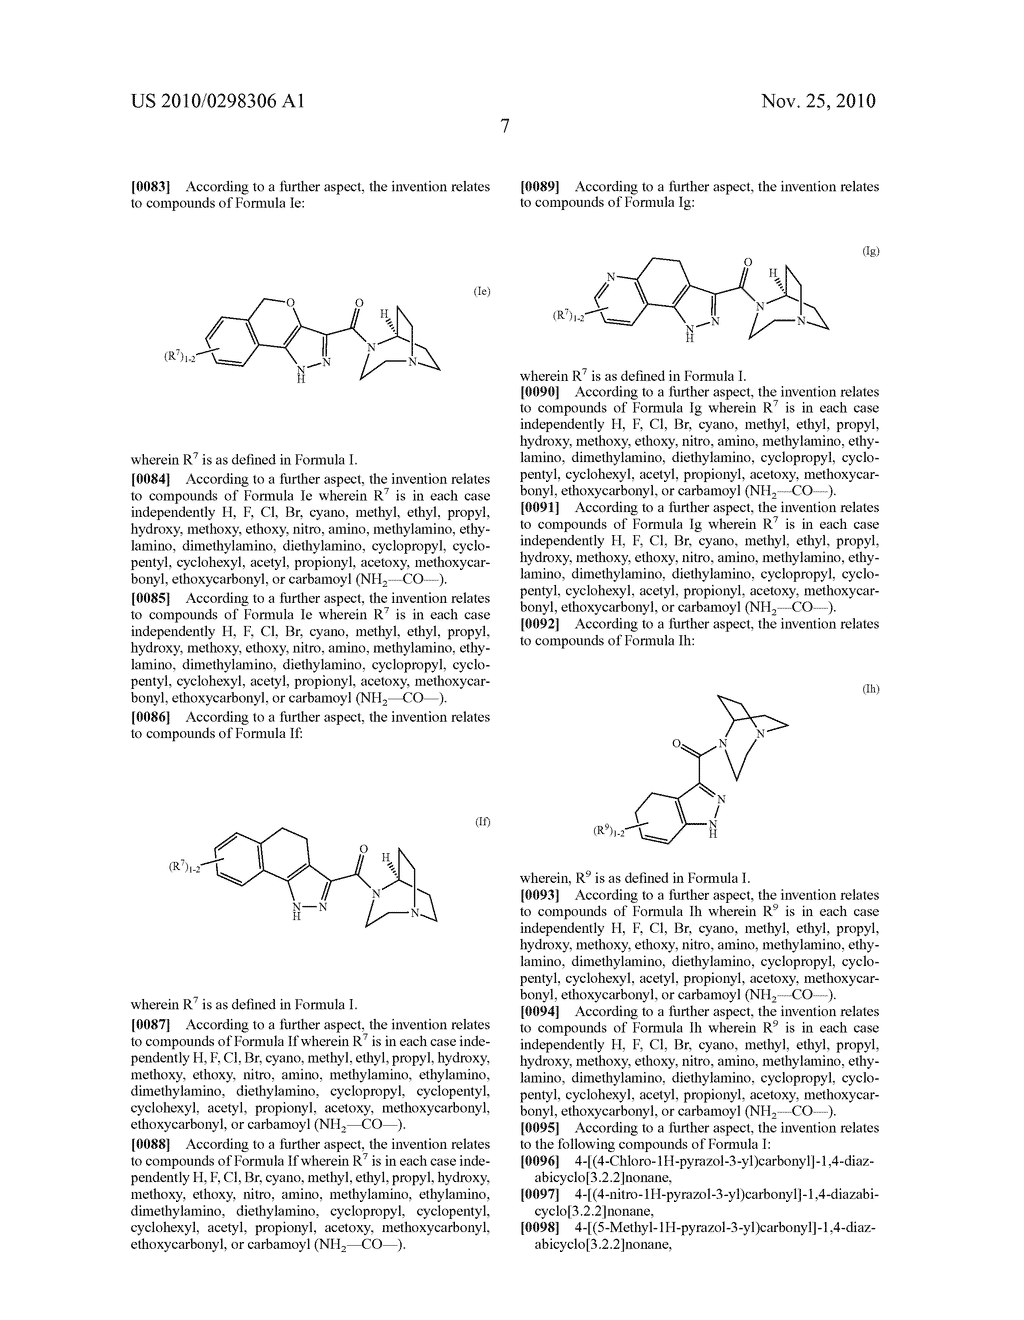 (1,4-Diaza-bicyclo[3.2.2]non-6-en-4-yl)-heterocyclyl-methanone Ligands for Nicotinic Acetylcholine Receptors, Useful for the Treatment of Disease - diagram, schematic, and image 08